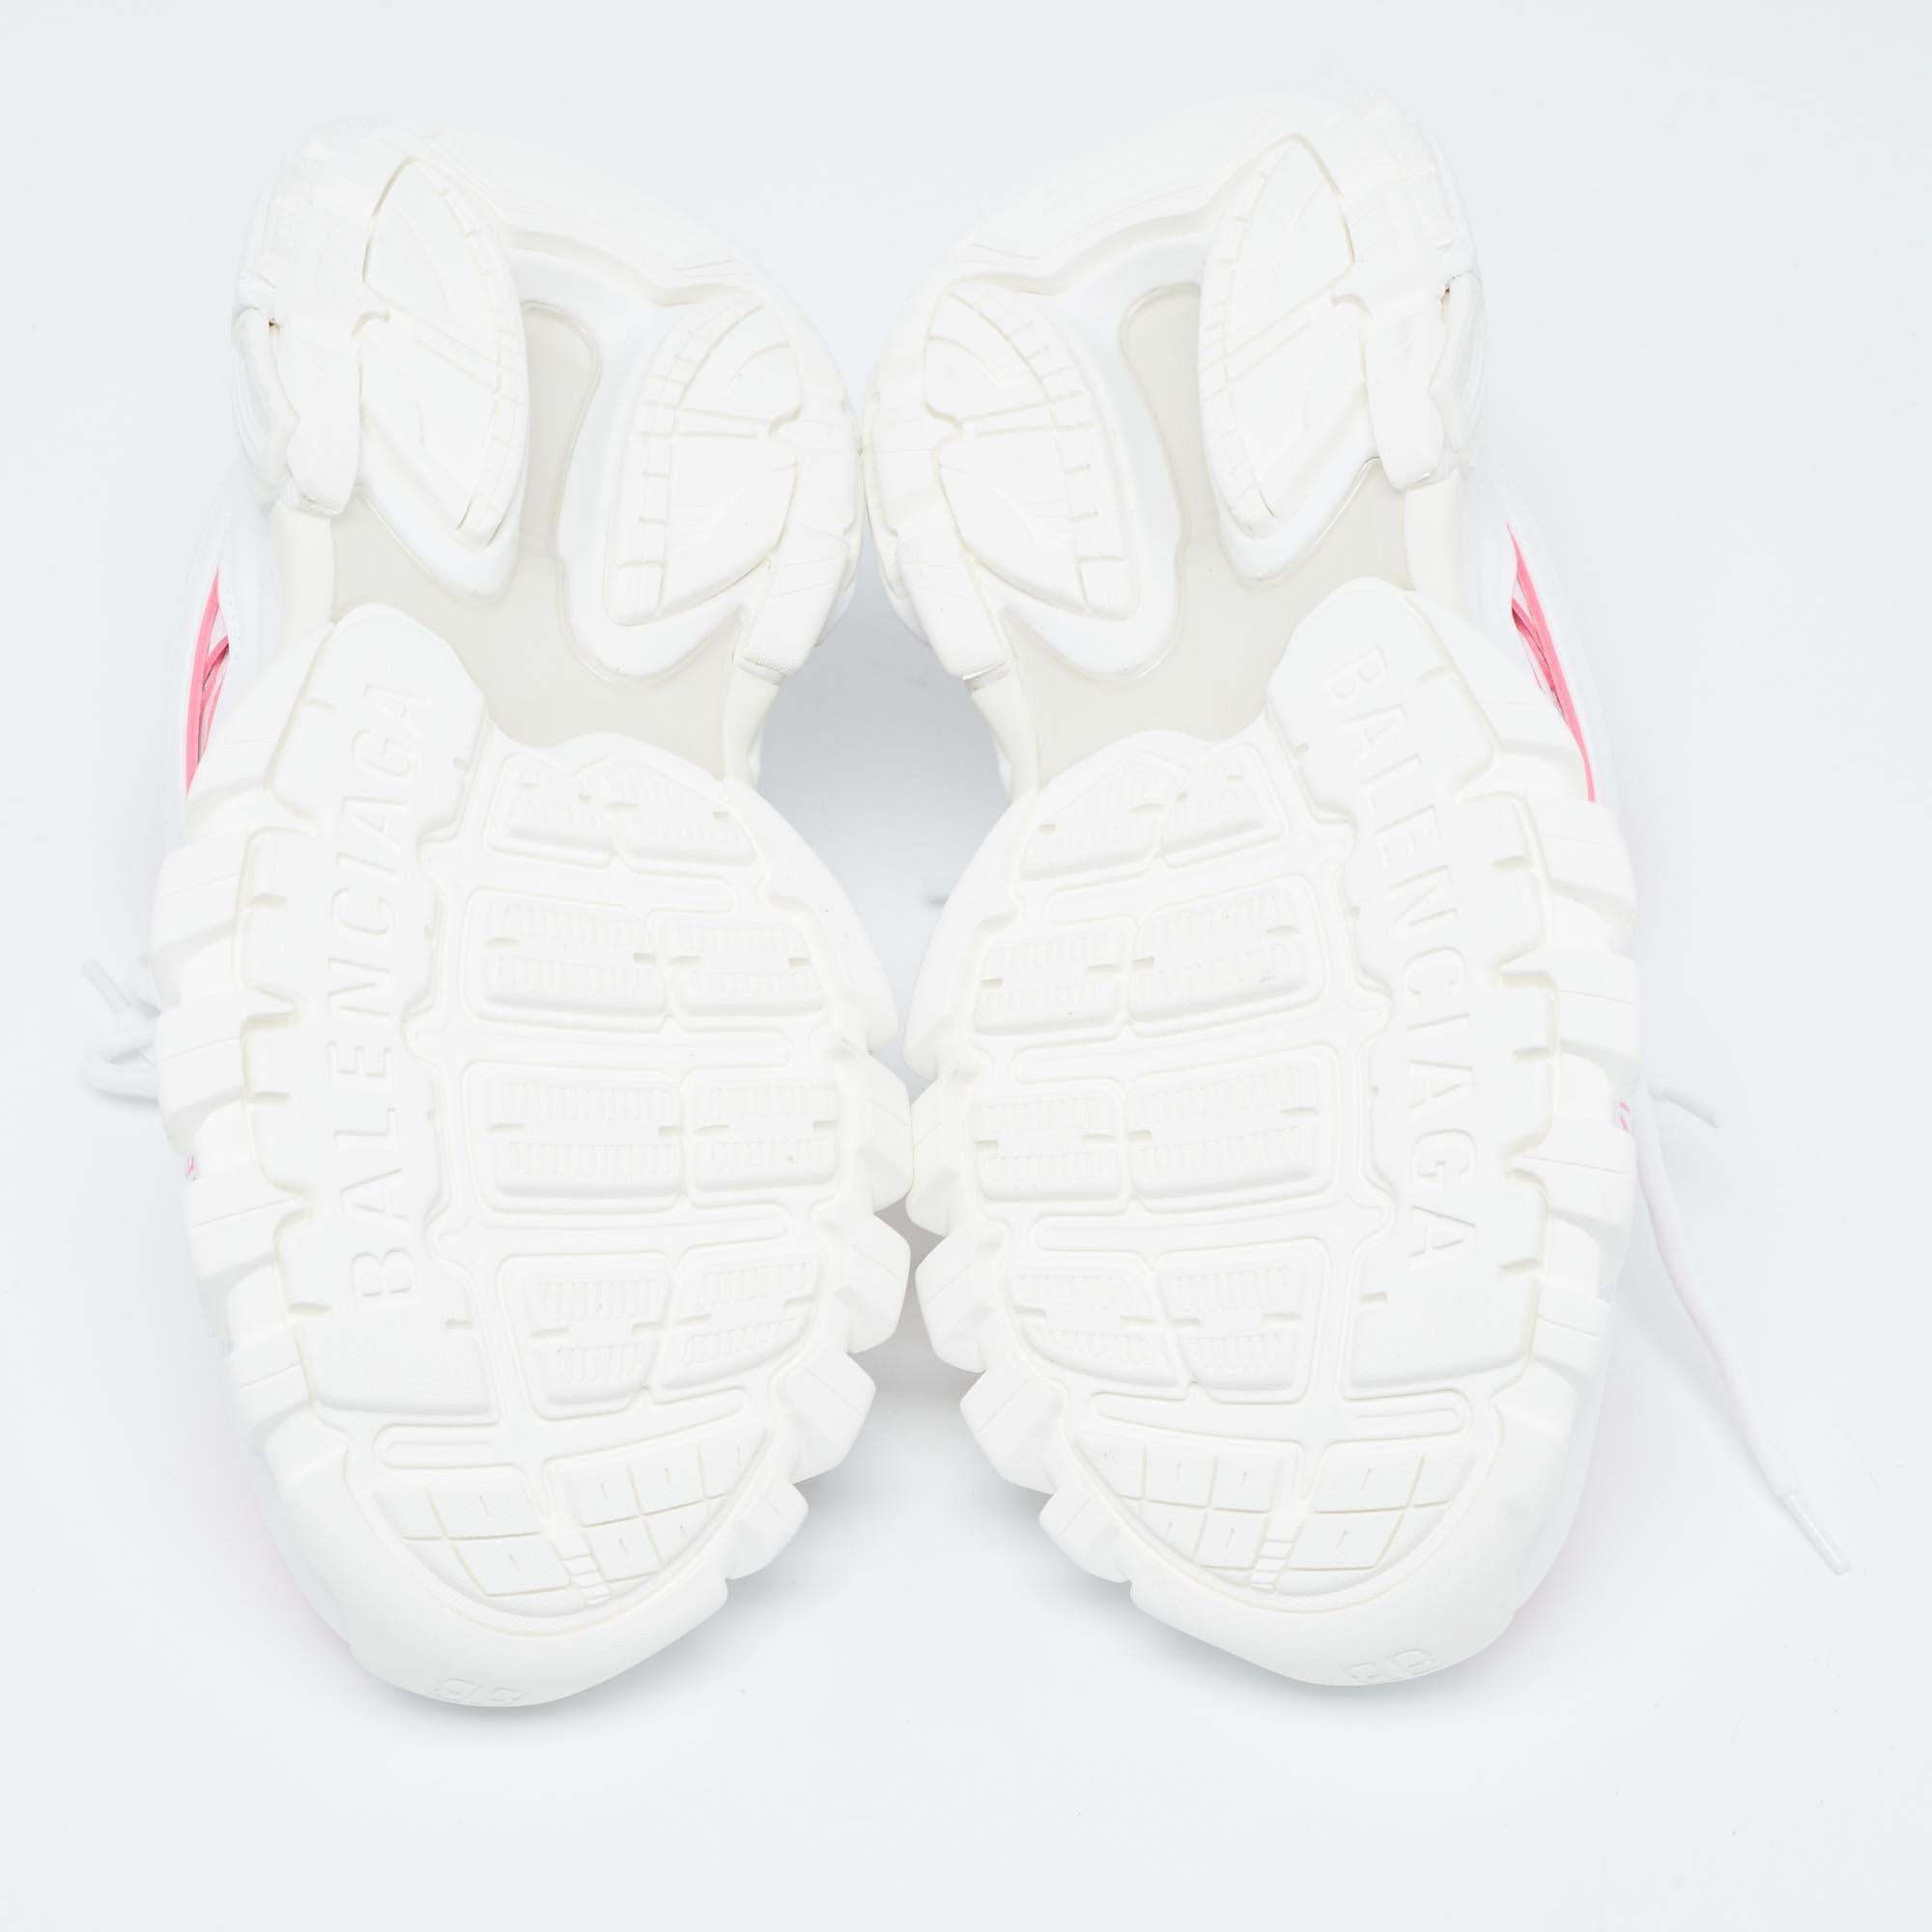 The Balenciaga Track Sneakers seamlessly blend style and comfort. Crafted with precision, these sneakers feature a sleek white rubber sole and a breathable knit fabric upper with delightful pink accents, creating a modern footwear masterpiece that